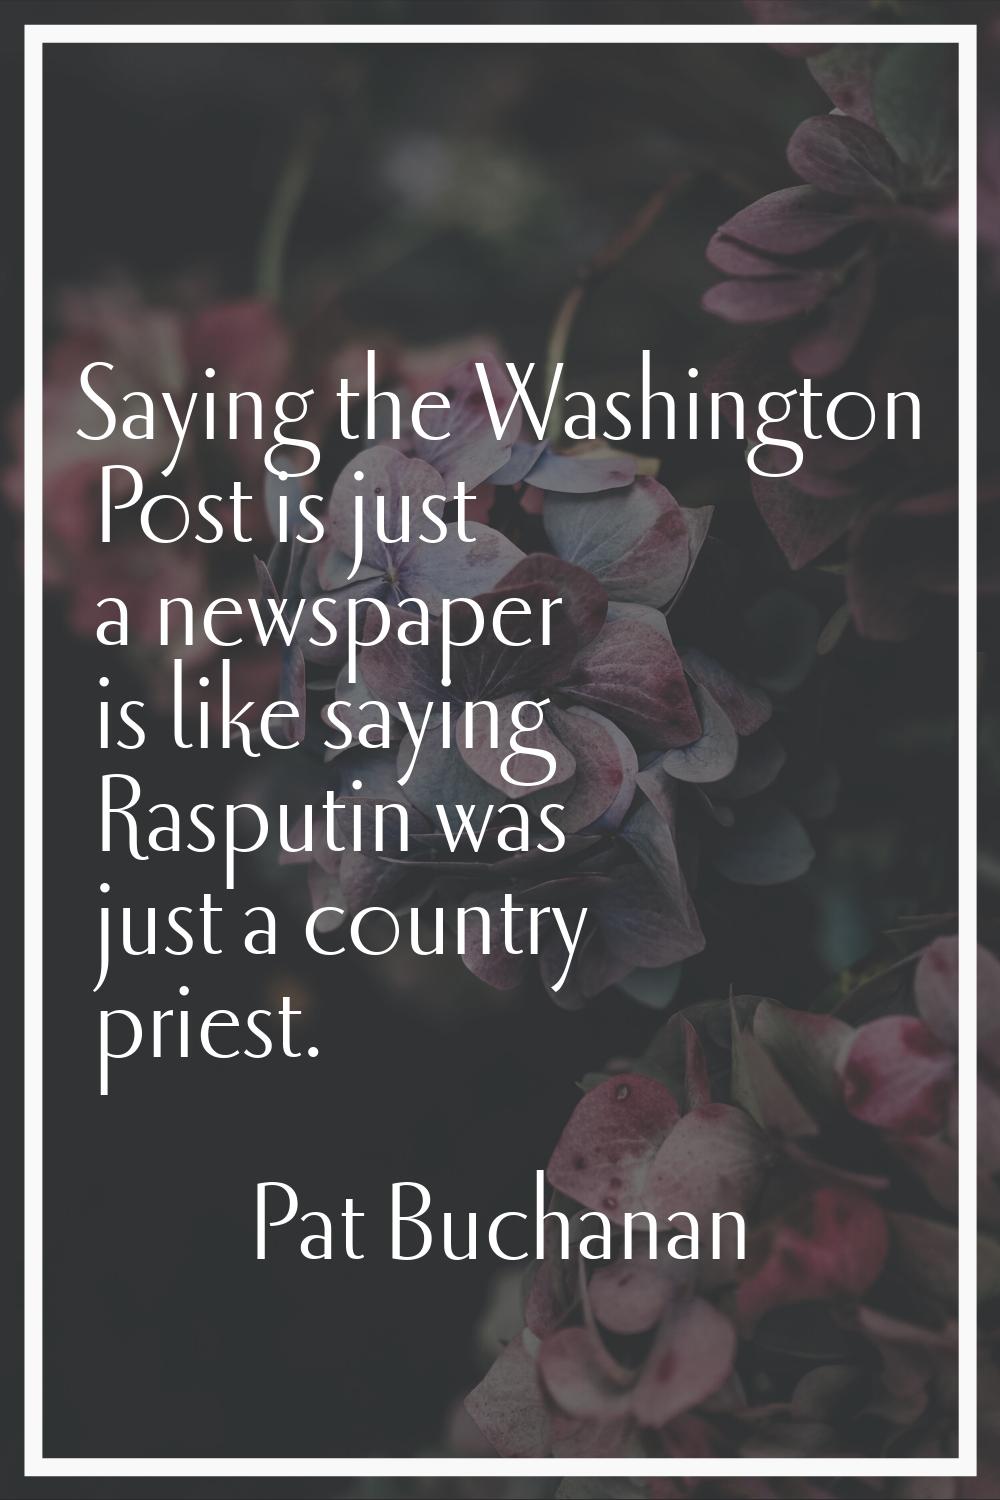 Saying the Washington Post is just a newspaper is like saying Rasputin was just a country priest.